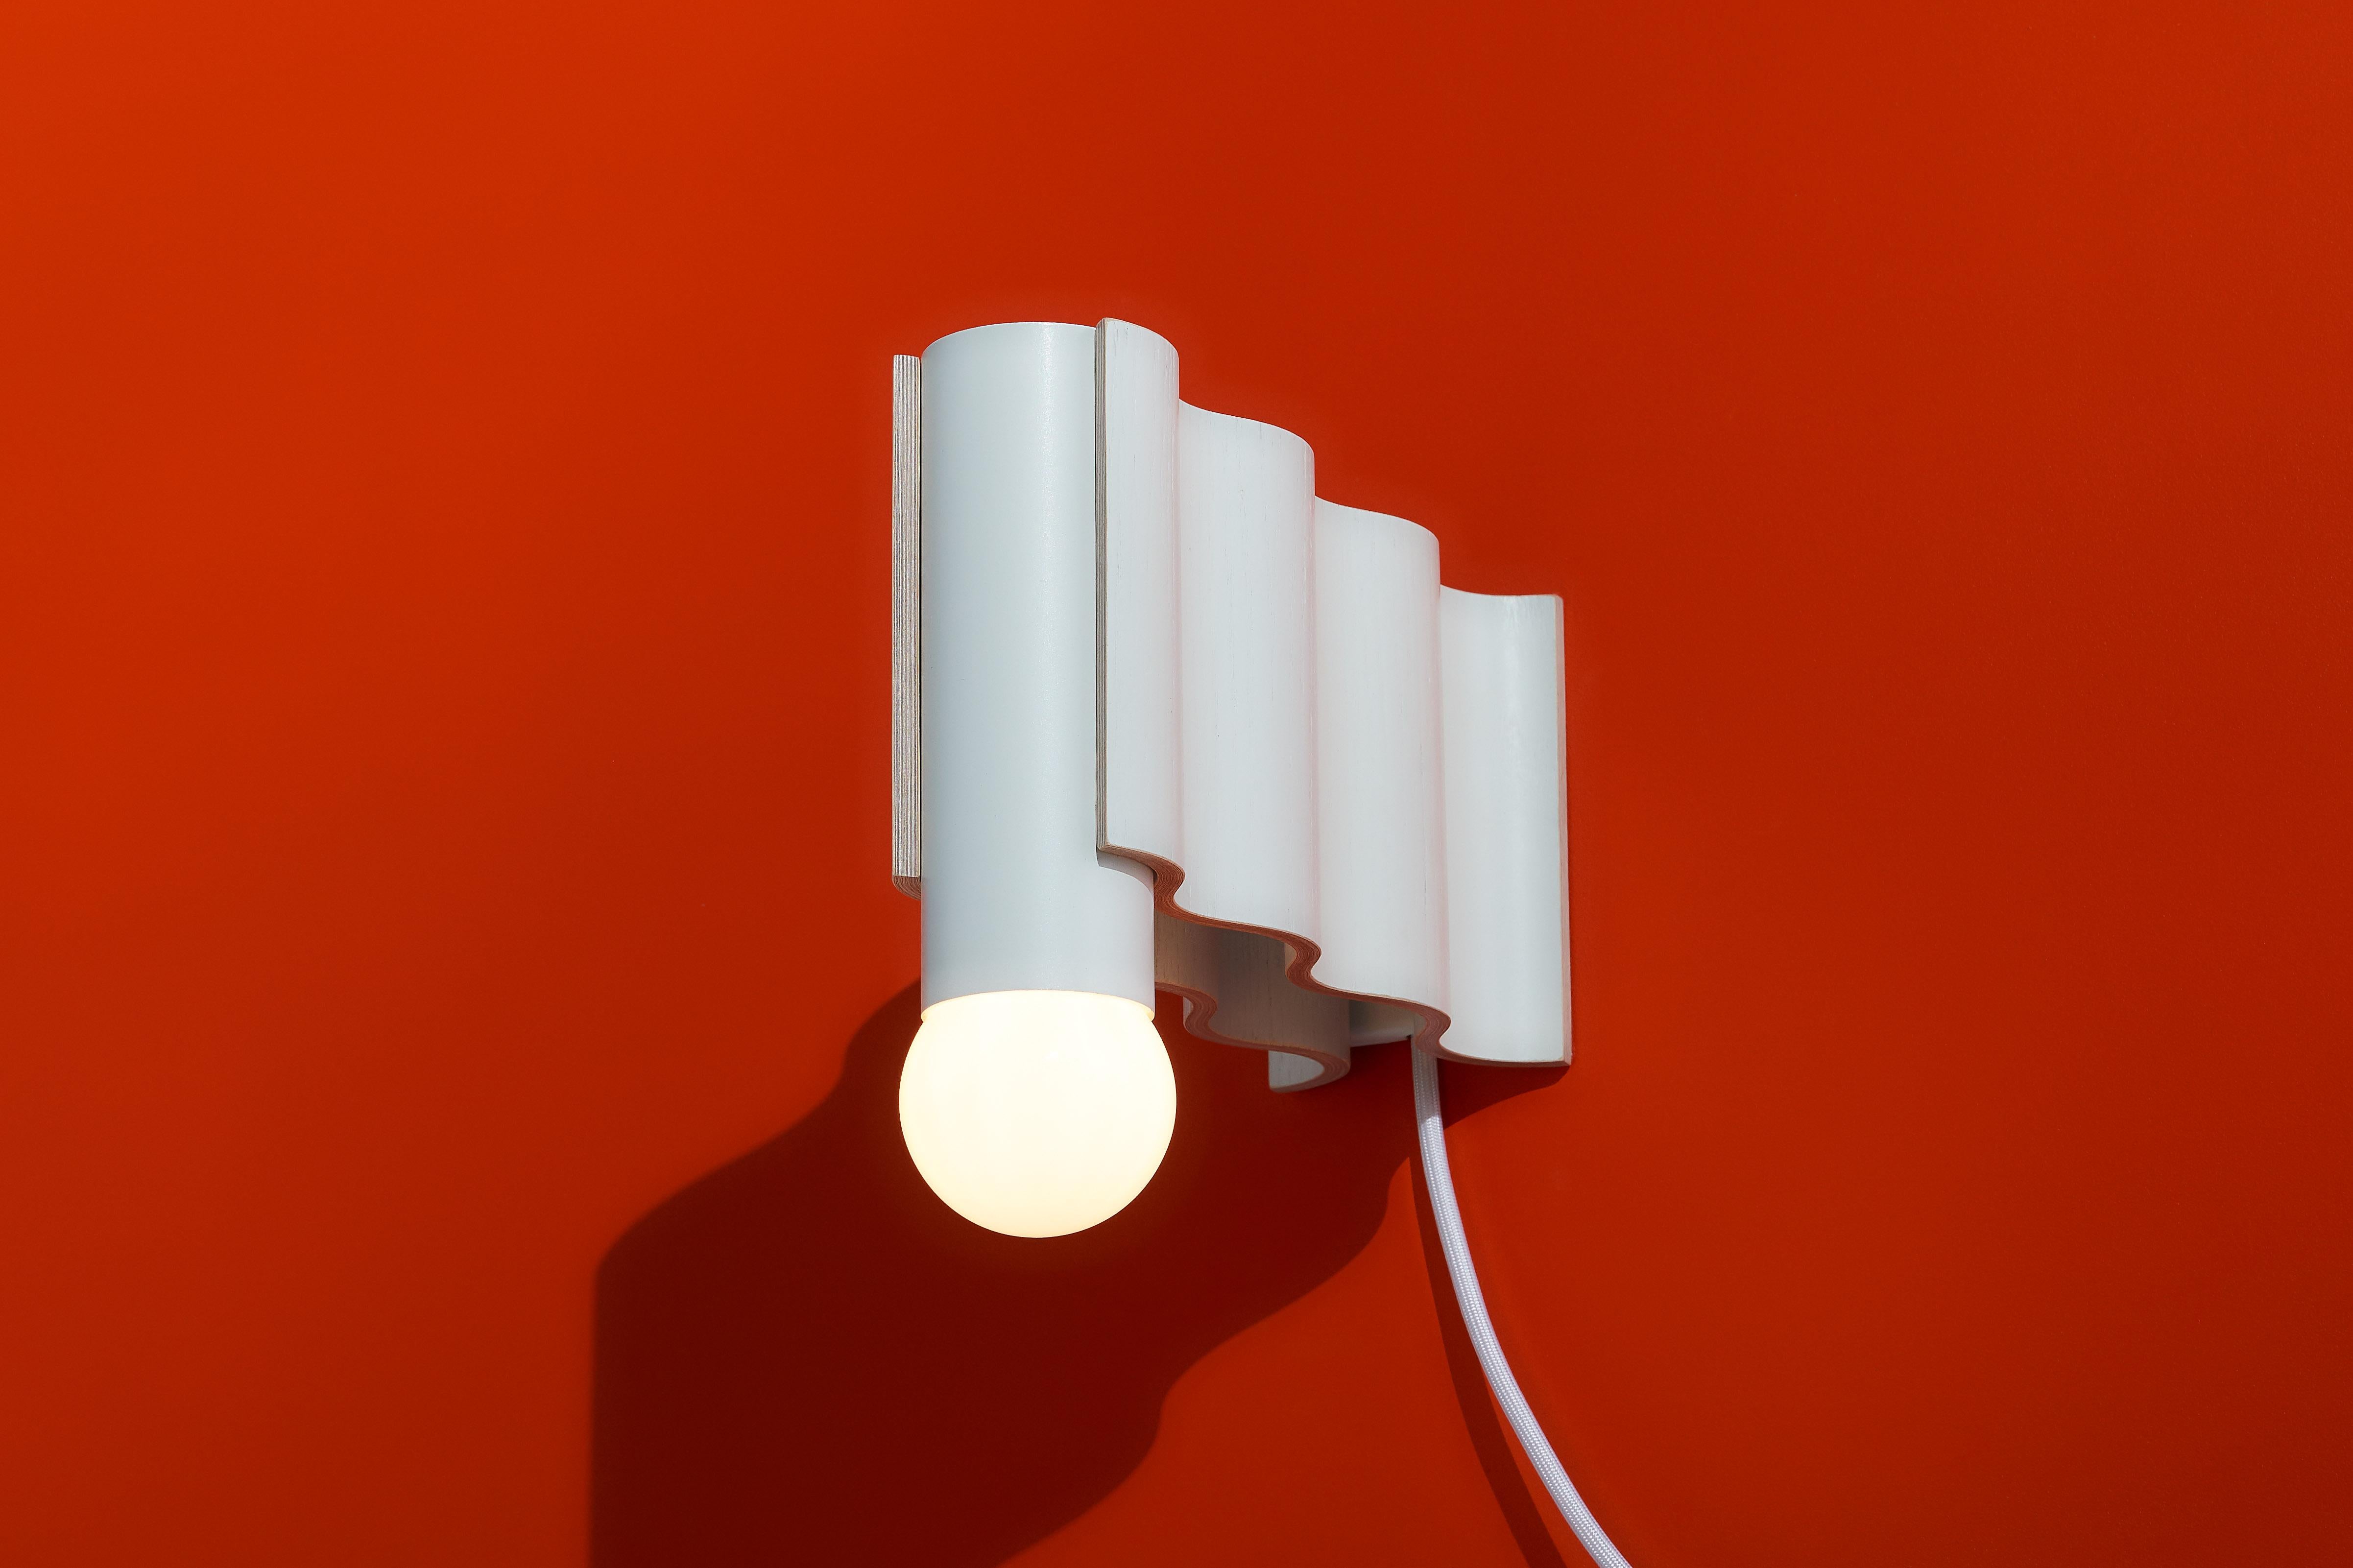 Single sconce made from off-white painted ash veneered plywood and off-white powder-coated aluminium tube.

Technical information:
- Comes with dimmable bulb (Class A60, 8W, 720 Lumen, 3000° Kelvin, A+ energy rating, Ra > 80)
- Can be wired for a